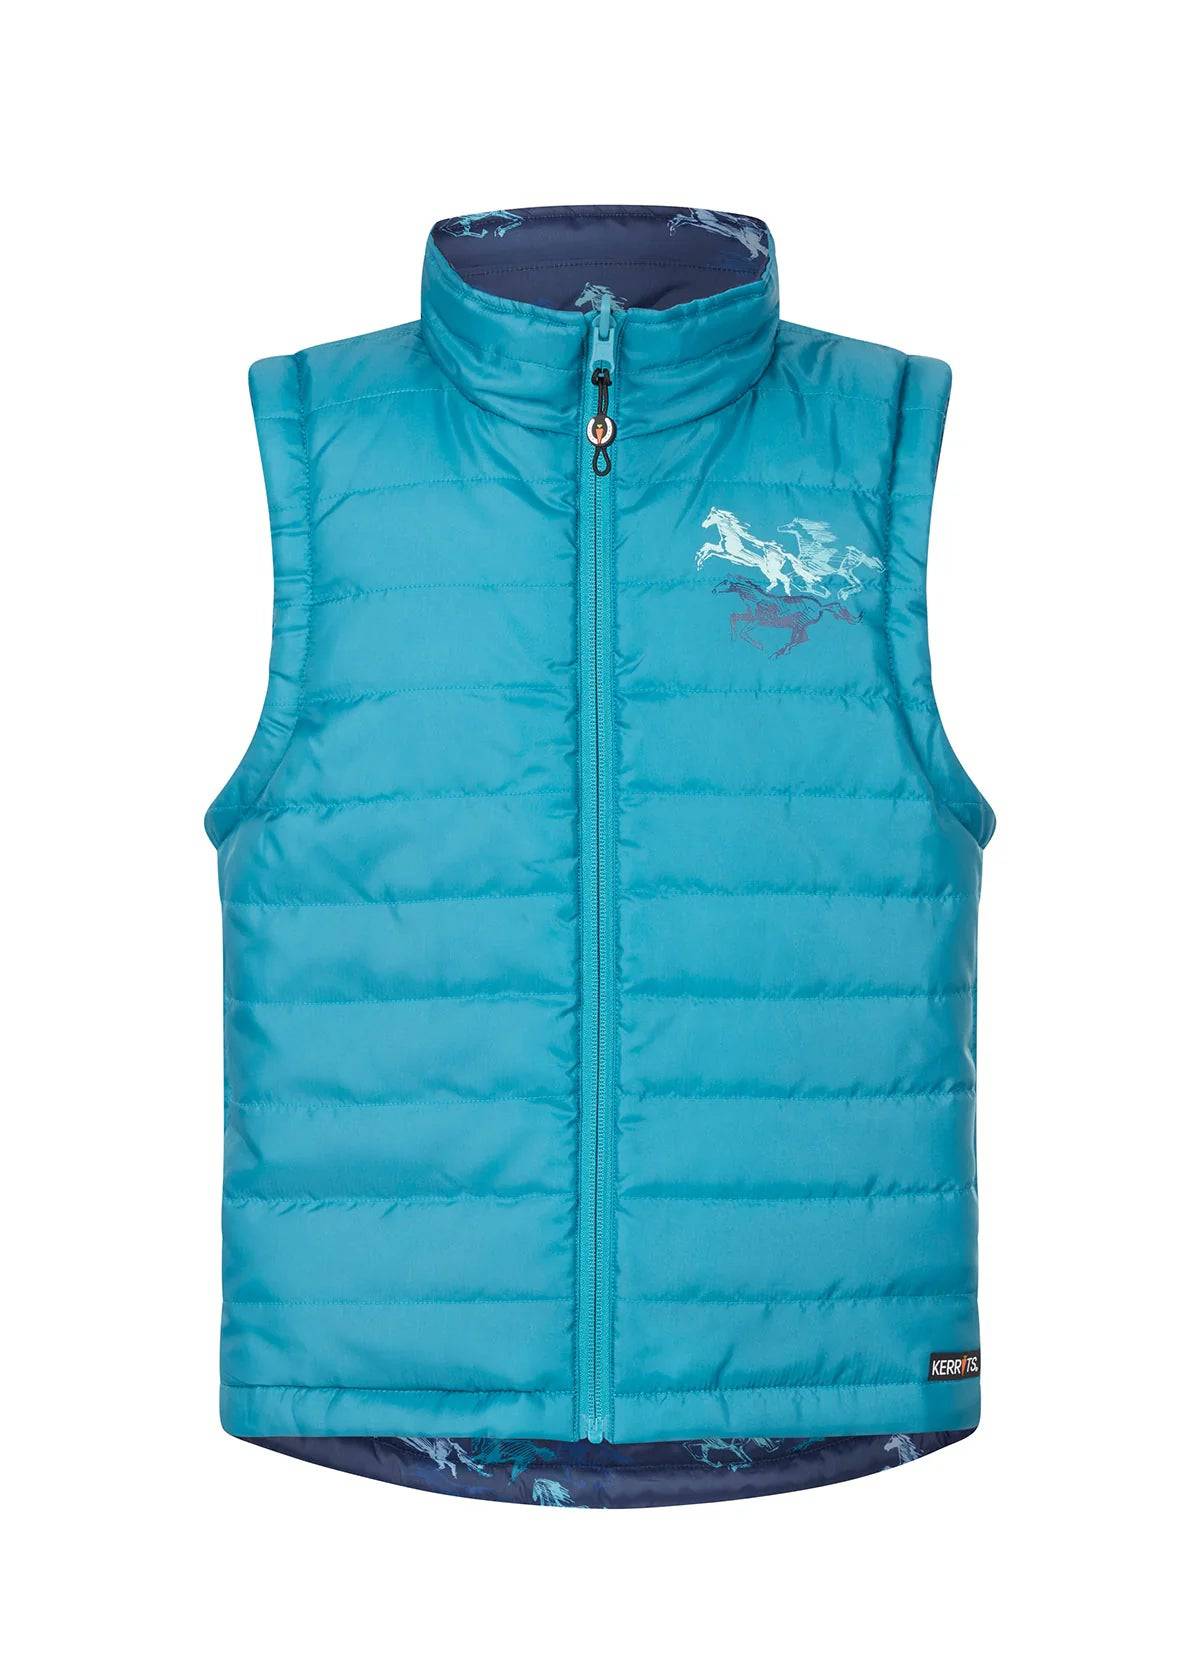 Kerrits Kids Pony Tracks Reversible Quilted Riding Vest - CLEARANCE - Equine Exchange Tack Shop